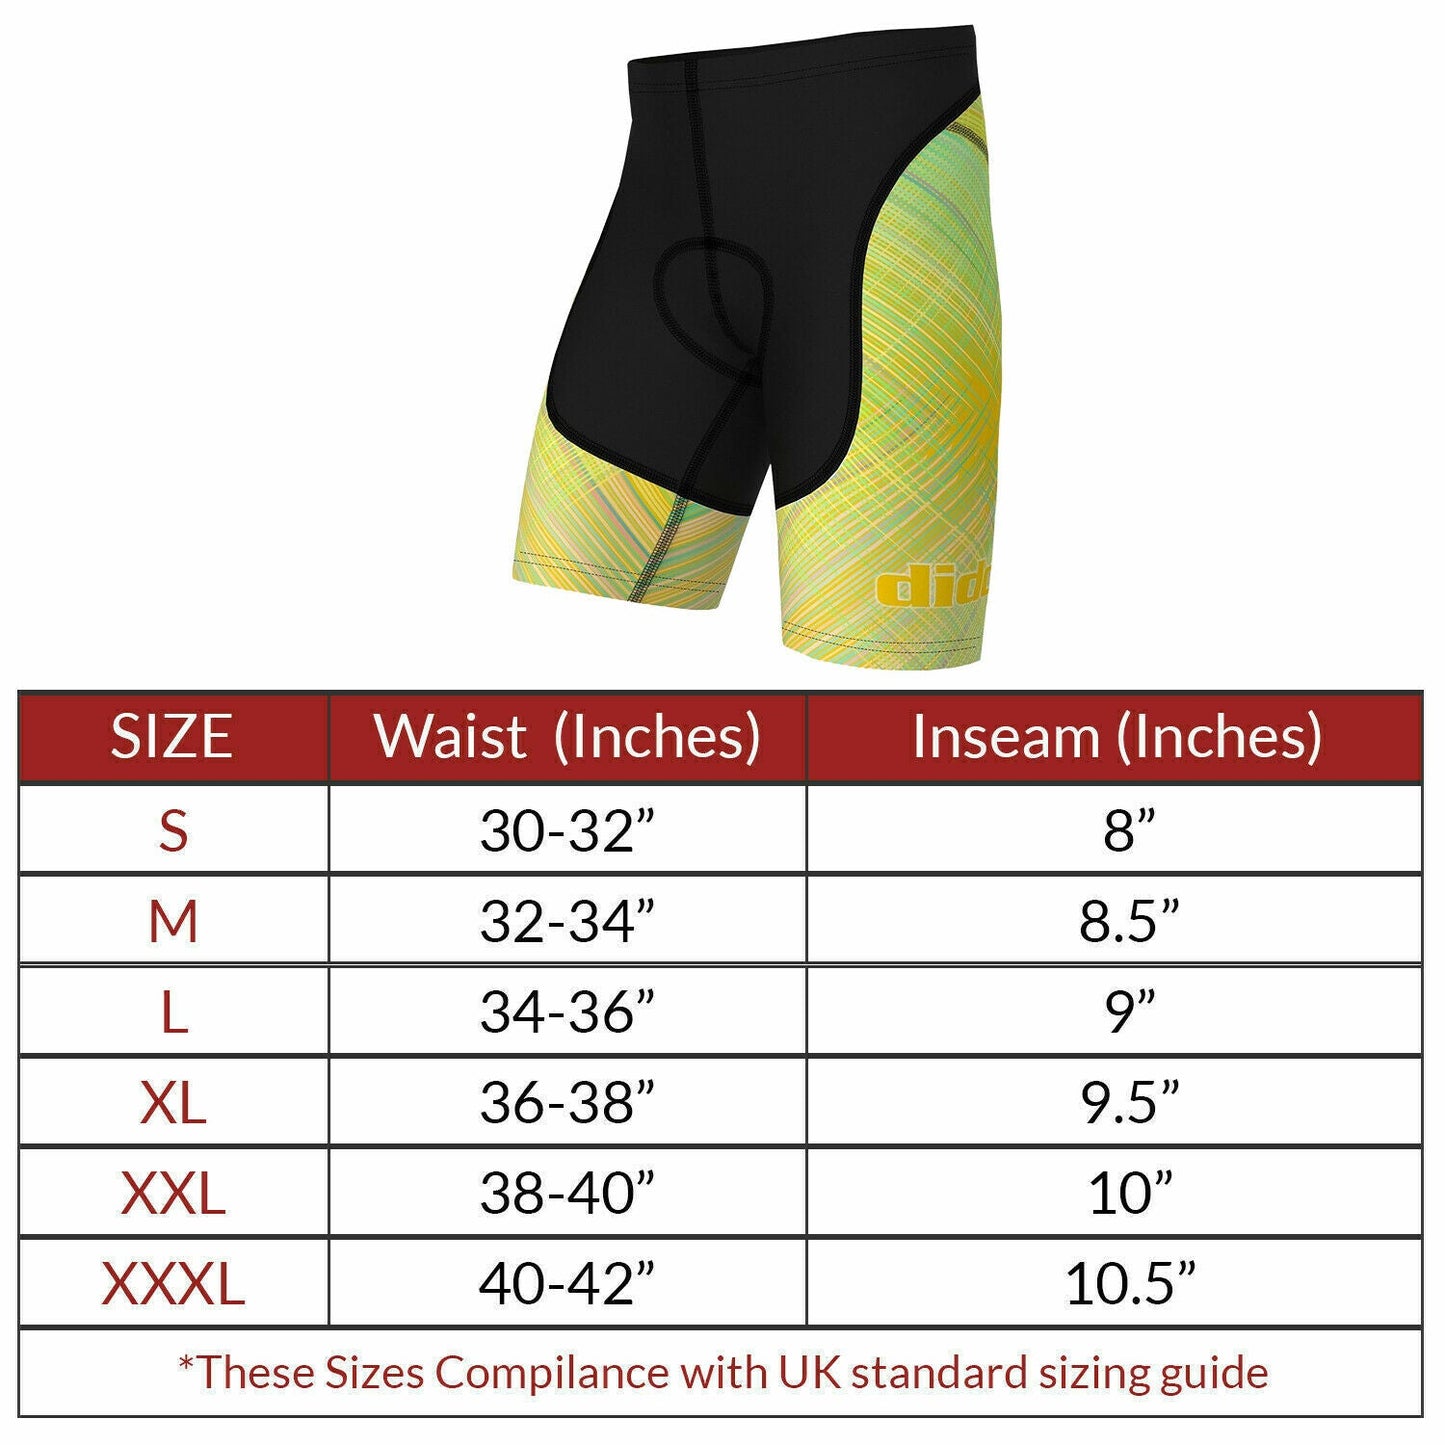 DiDOO Men's Classic Quick Dry Padded Cycling Shorts Black and Yellow